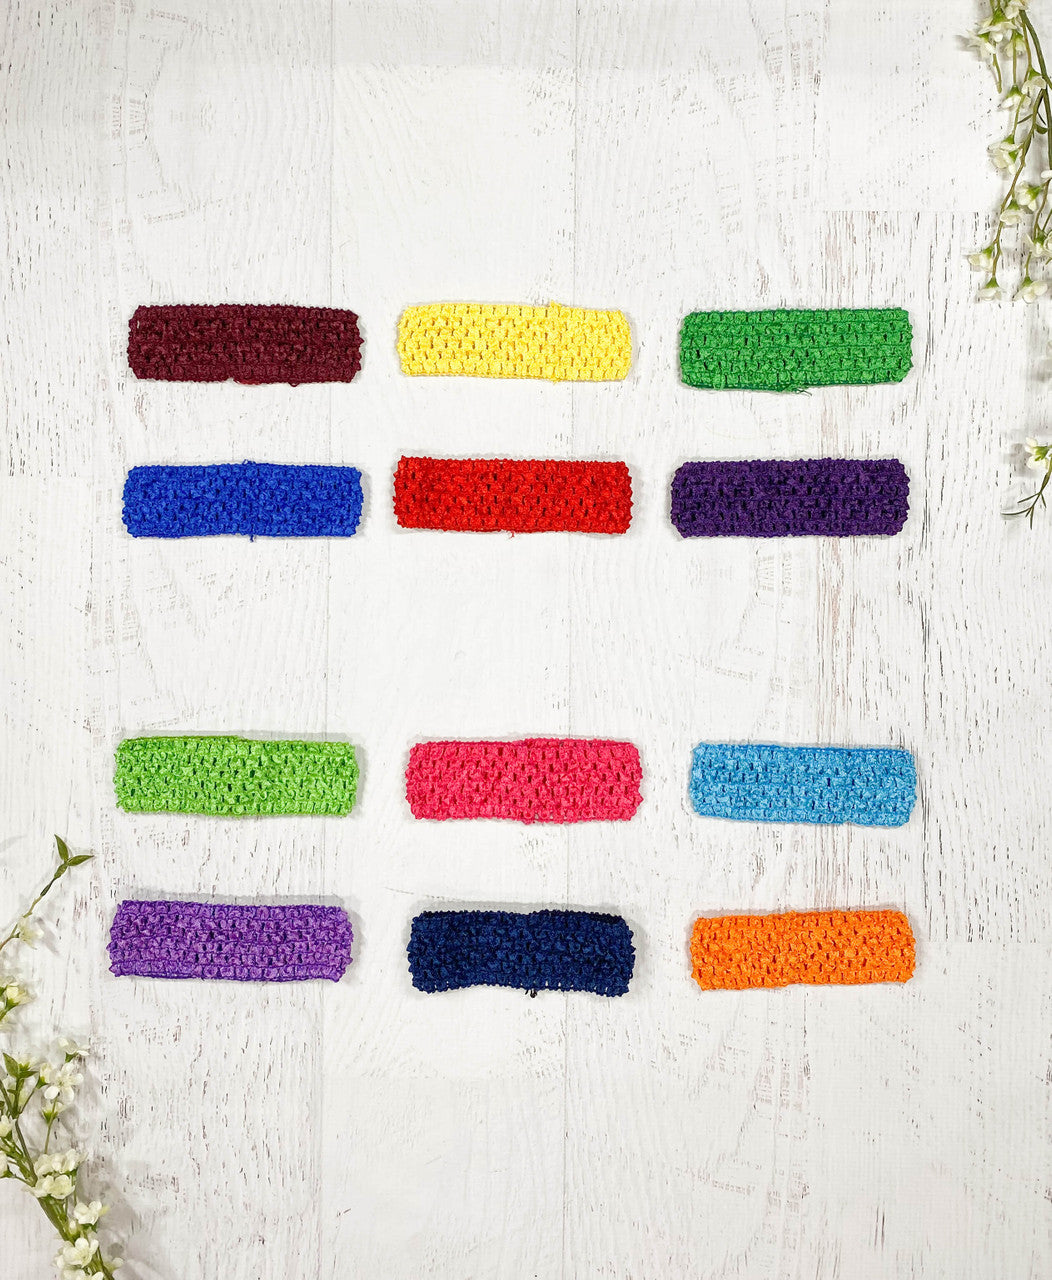 Bright 1.5" Crochet Headband 12-Pack Includes: Hot Pink, Red, Orange, Lemon Yellow, Neon Green, Kelly Green, Turquoise, Royal Blue, Navy, Burgundy, Purple, and Eggplant